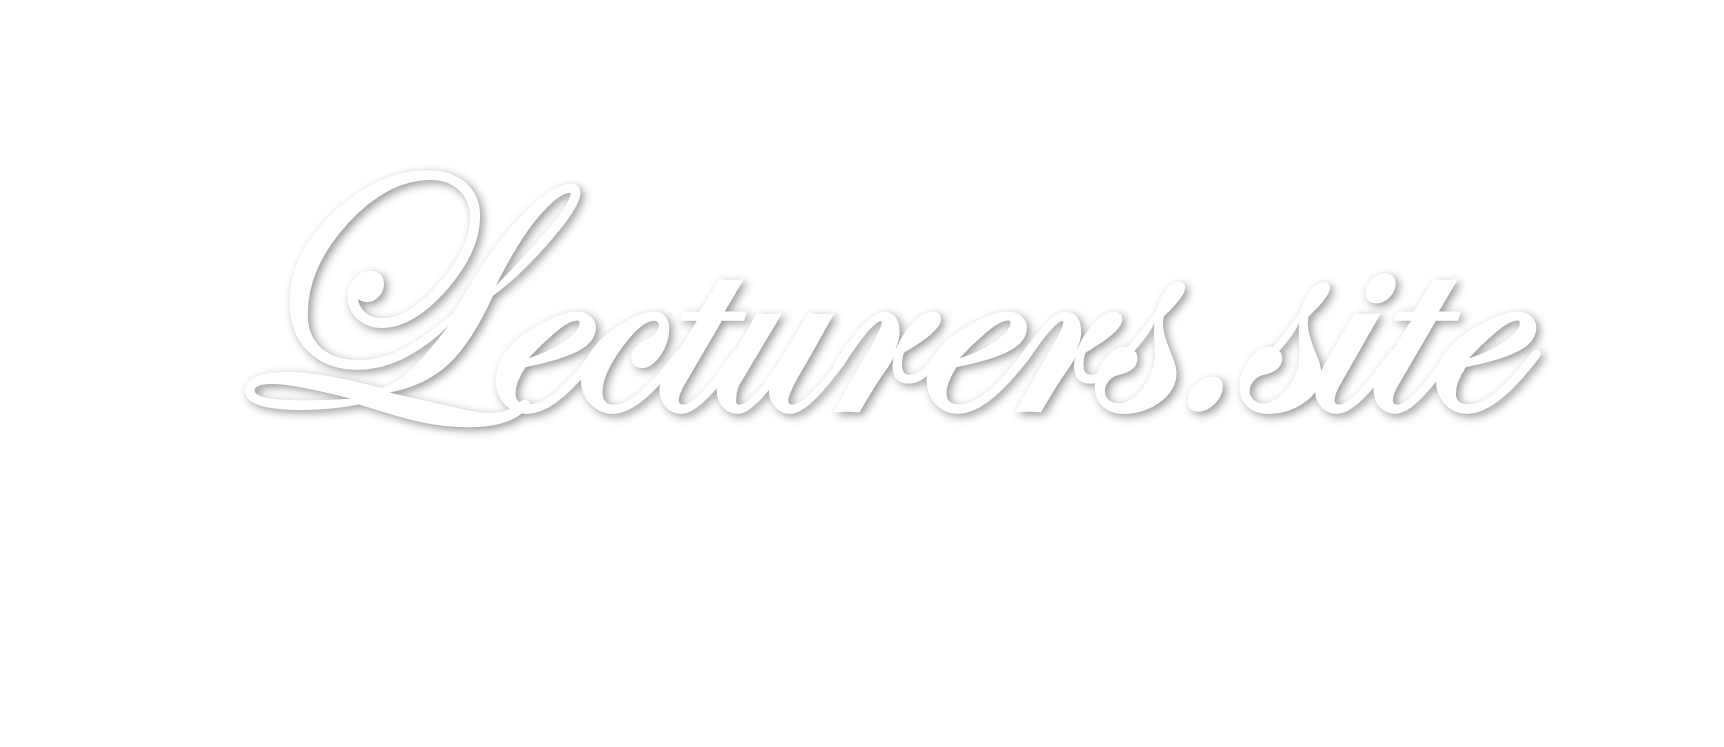 Lecturers.site